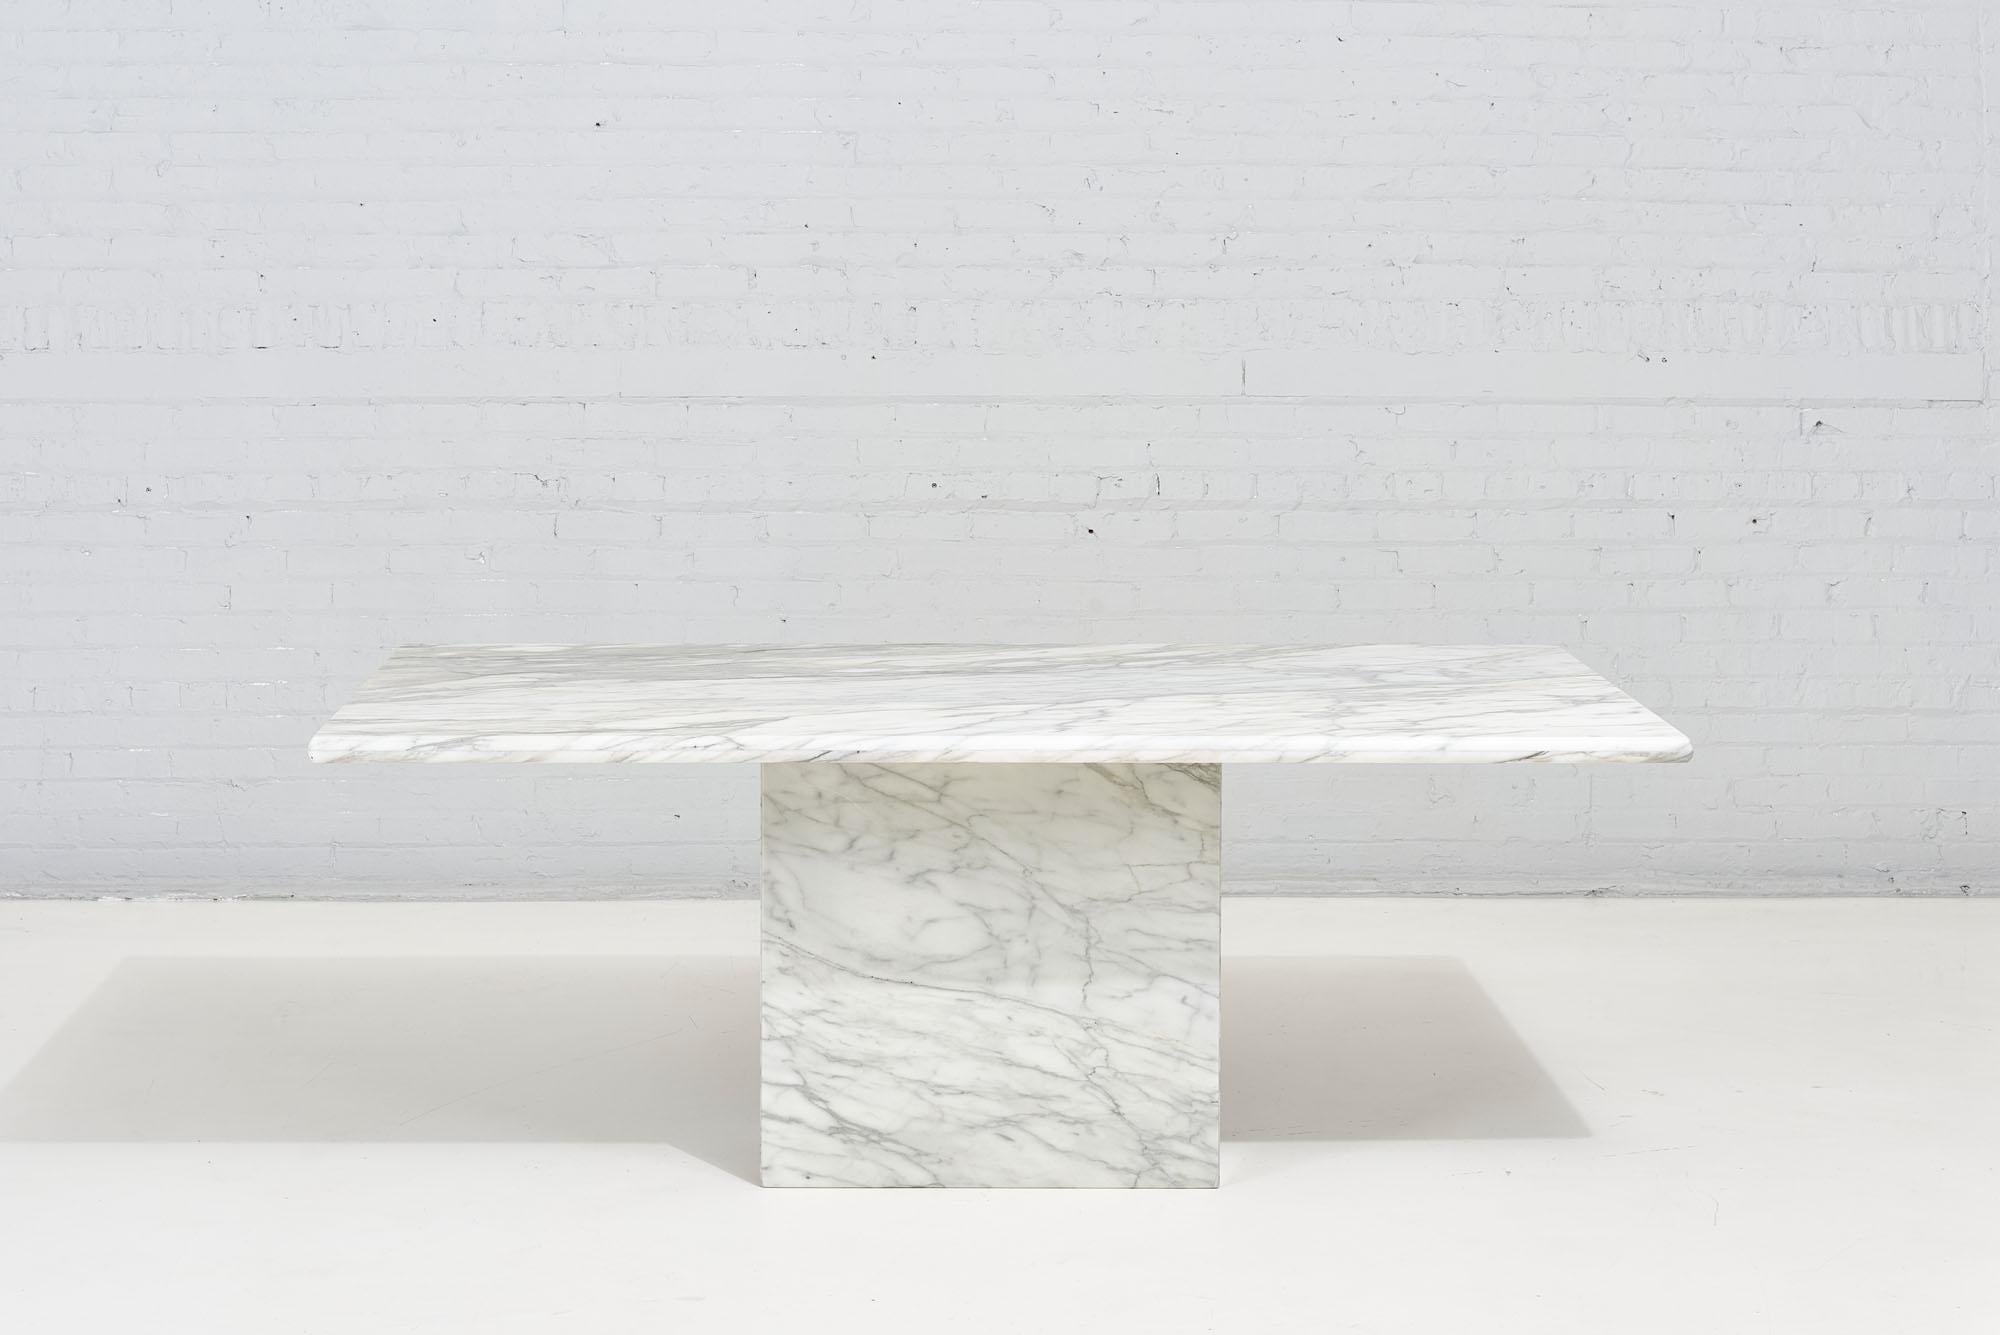 Italian Calacatta Statuario Marble Dining Table produced by Stone International, circa 1970. Beautiful white stone with grey, gold, & blue-grey colors throughout. Table is in excellent vintage condition.